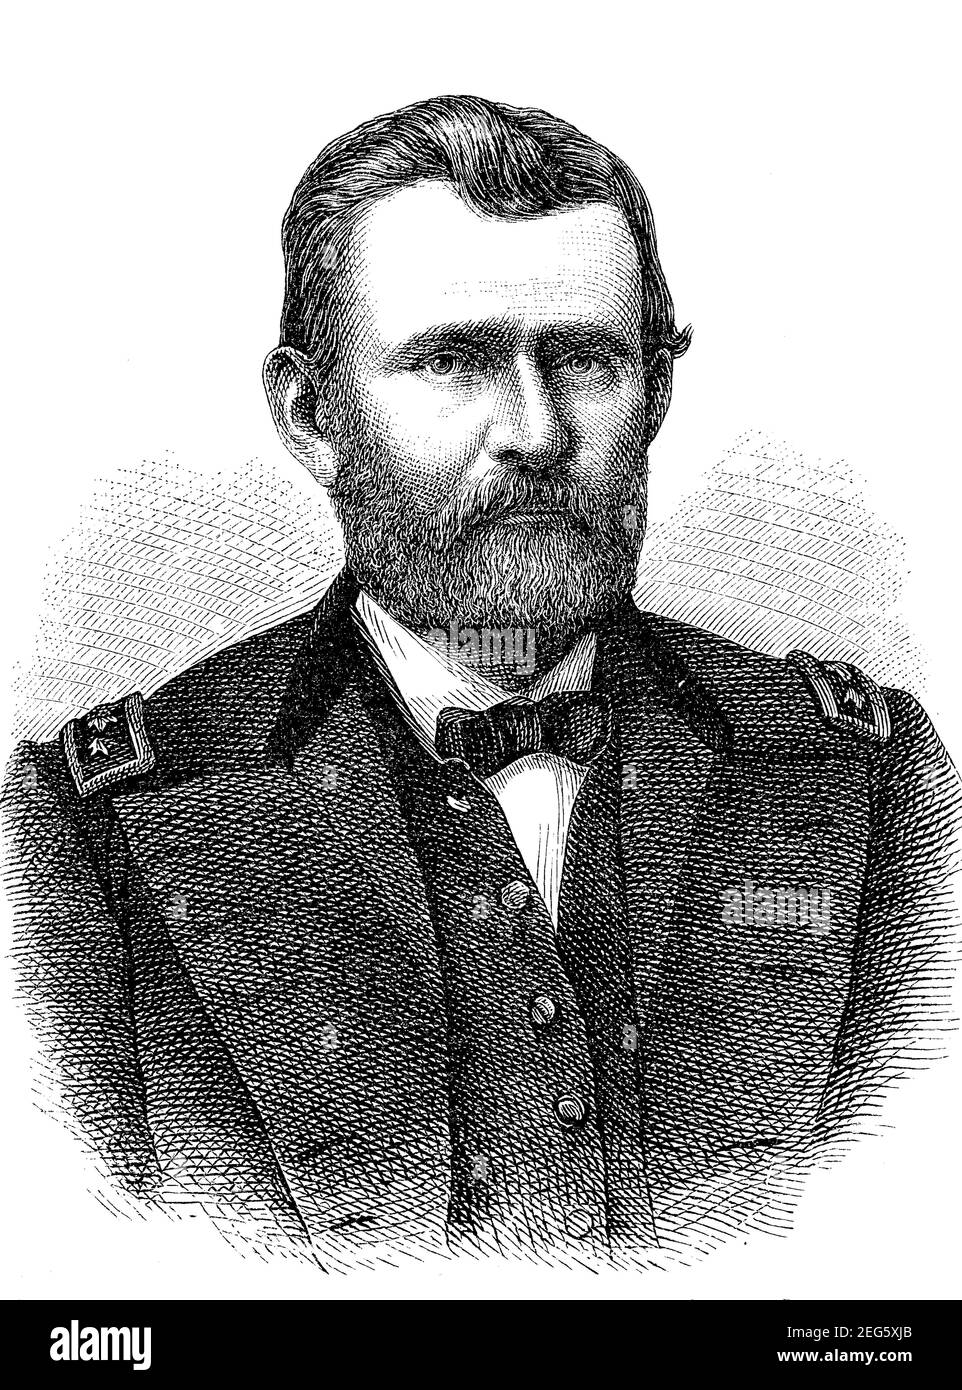 Ulysses S. Grant, April 27, 1822 - July 23, 1885, a U.S. general and politician. He was commander-in-chief of the U.S. Army in the War of Secession and the 18th president of the United States of America from 1869 to 1877  /  Ulysses S. Grant, 27. April 1822 - 23. Juli 1885, ein US-amerikanischer General und Politiker. Er war Oberbefehlshaber des US-Heeres im Sezessionskrieg und von 1869 bis 1877 der 18. Praesident der Vereinigten Staaten von Amerika, Historisch, historical, digital improved reproduction of an original from the 19th century / digitale Reproduktion einer Originalvorlage aus dem Stock Photo